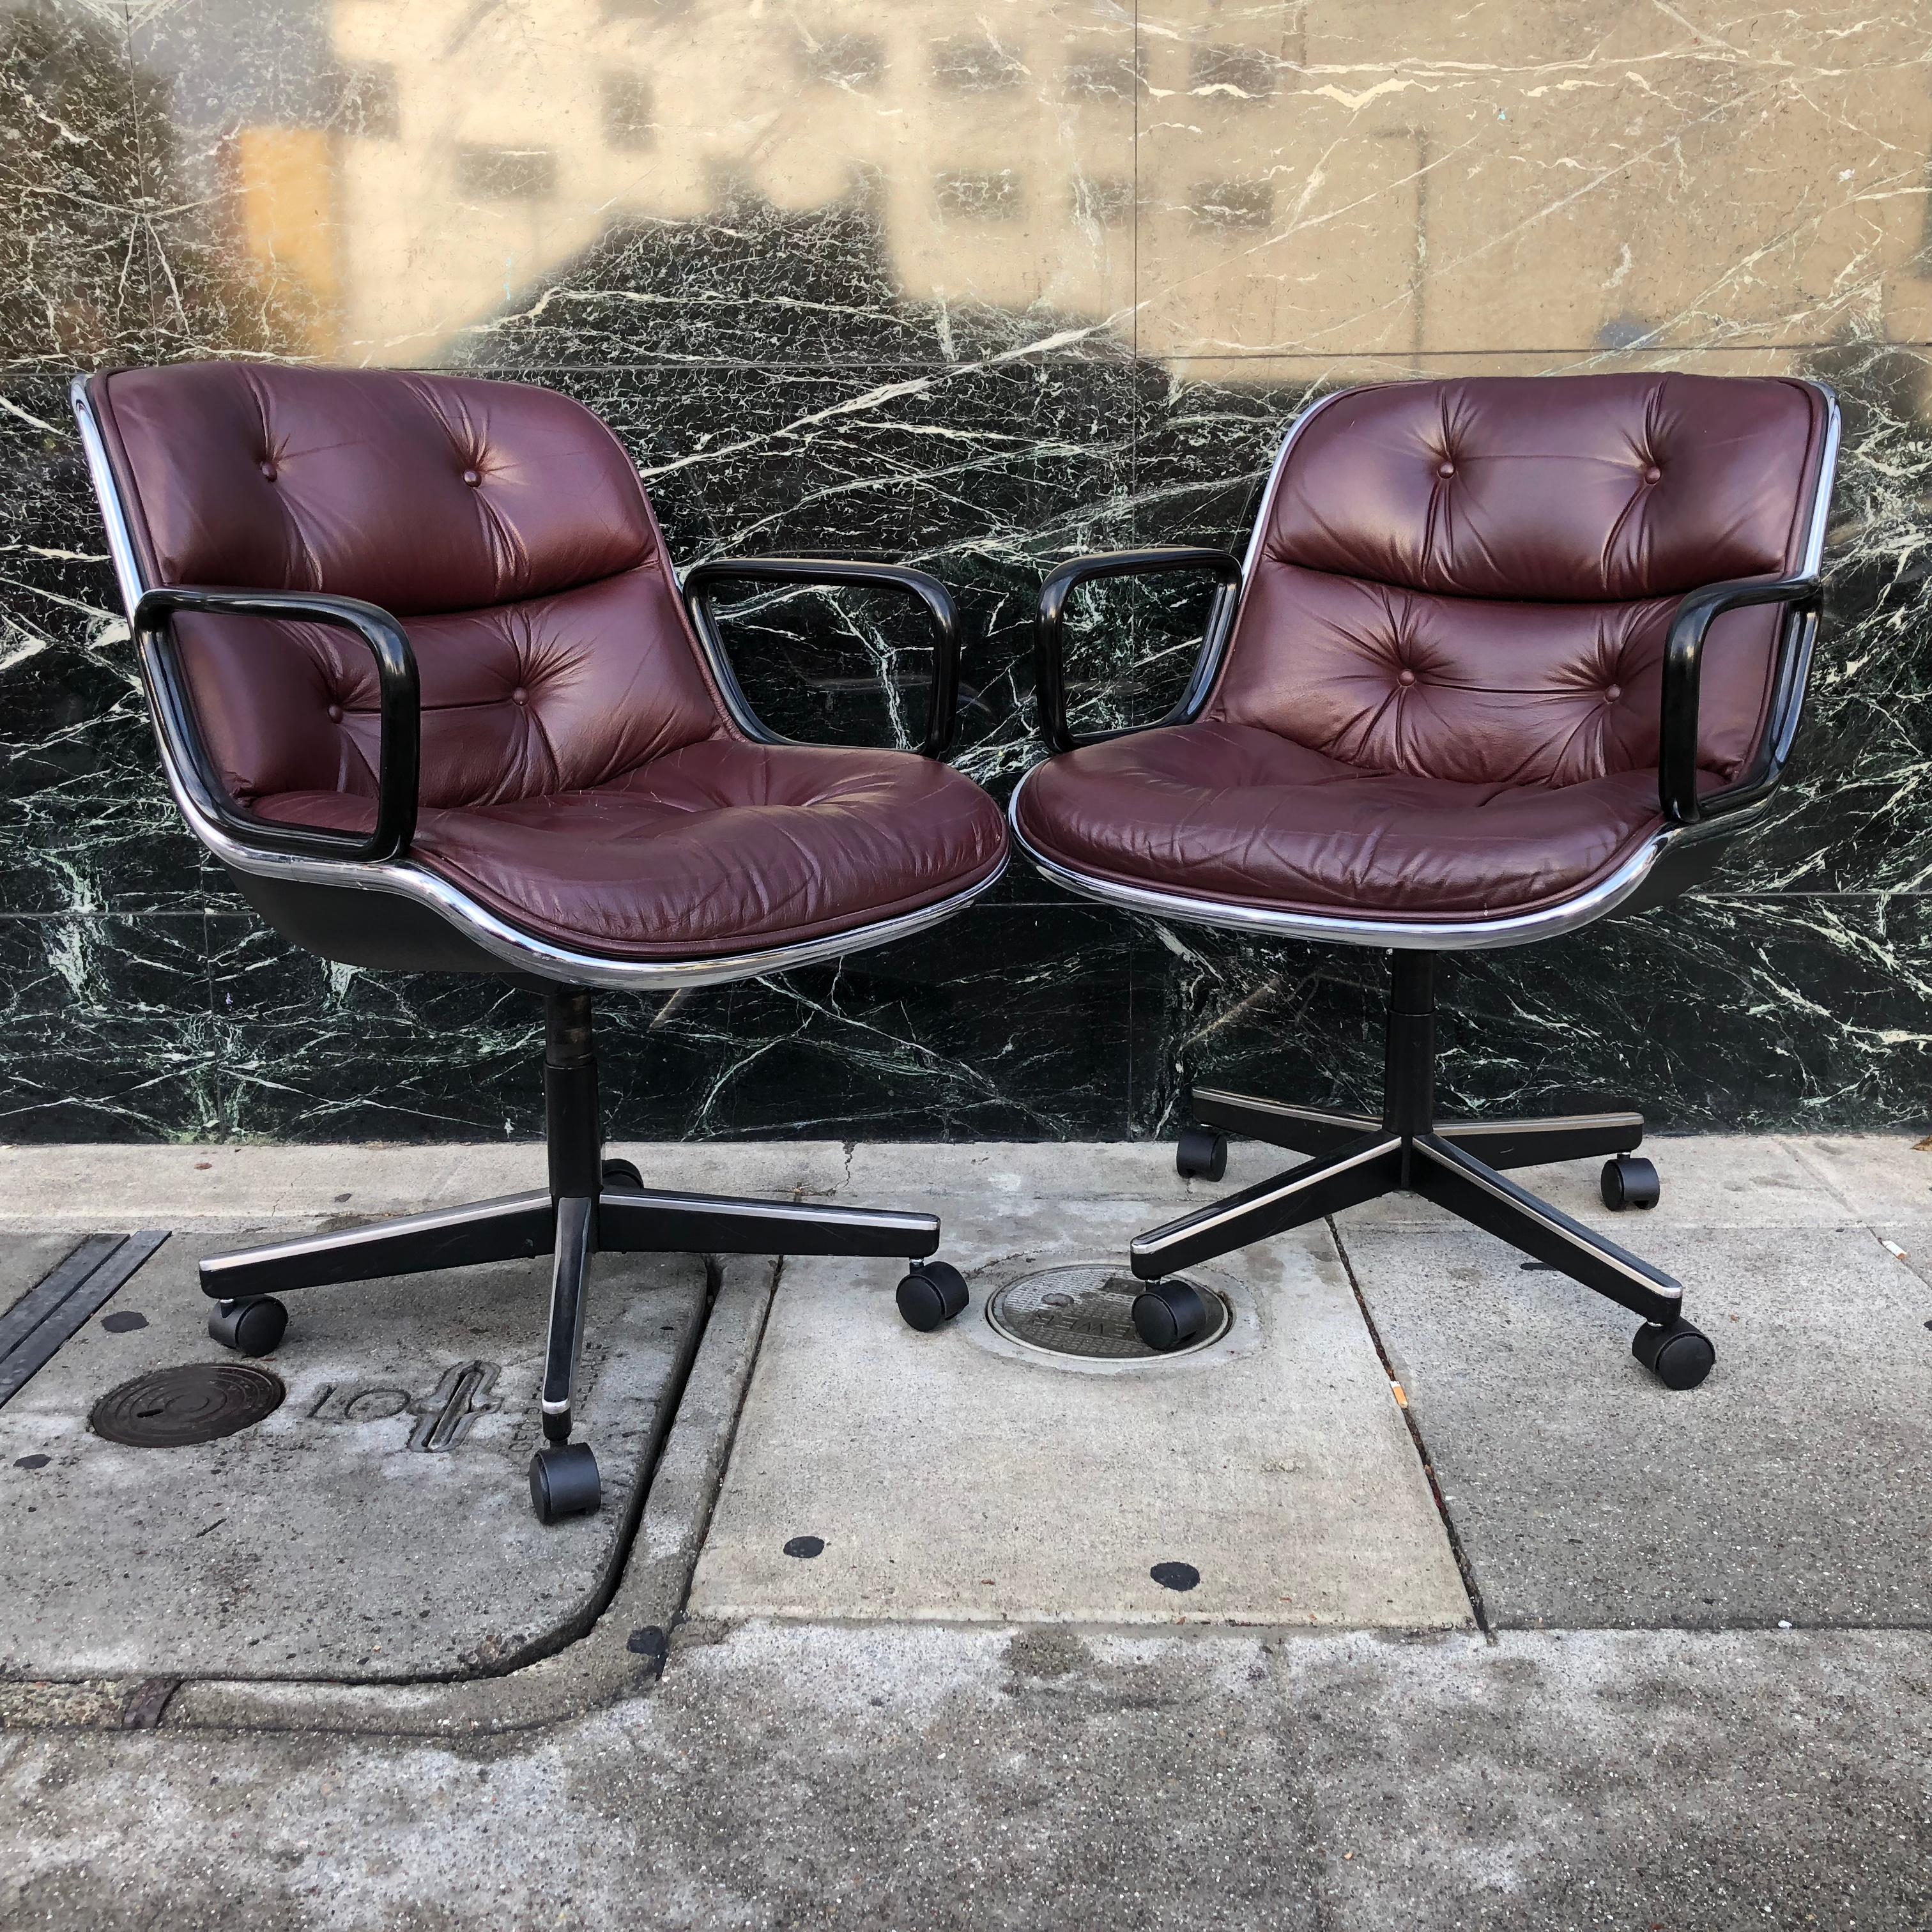 For your consideration are icons of Mid-Century Modern design -- office chairs by Charles Pollock for Knoll. 

These chairs, with a hard plastic back, aluminum frame and tufted leather seat, revolutionized office seating. They have been in